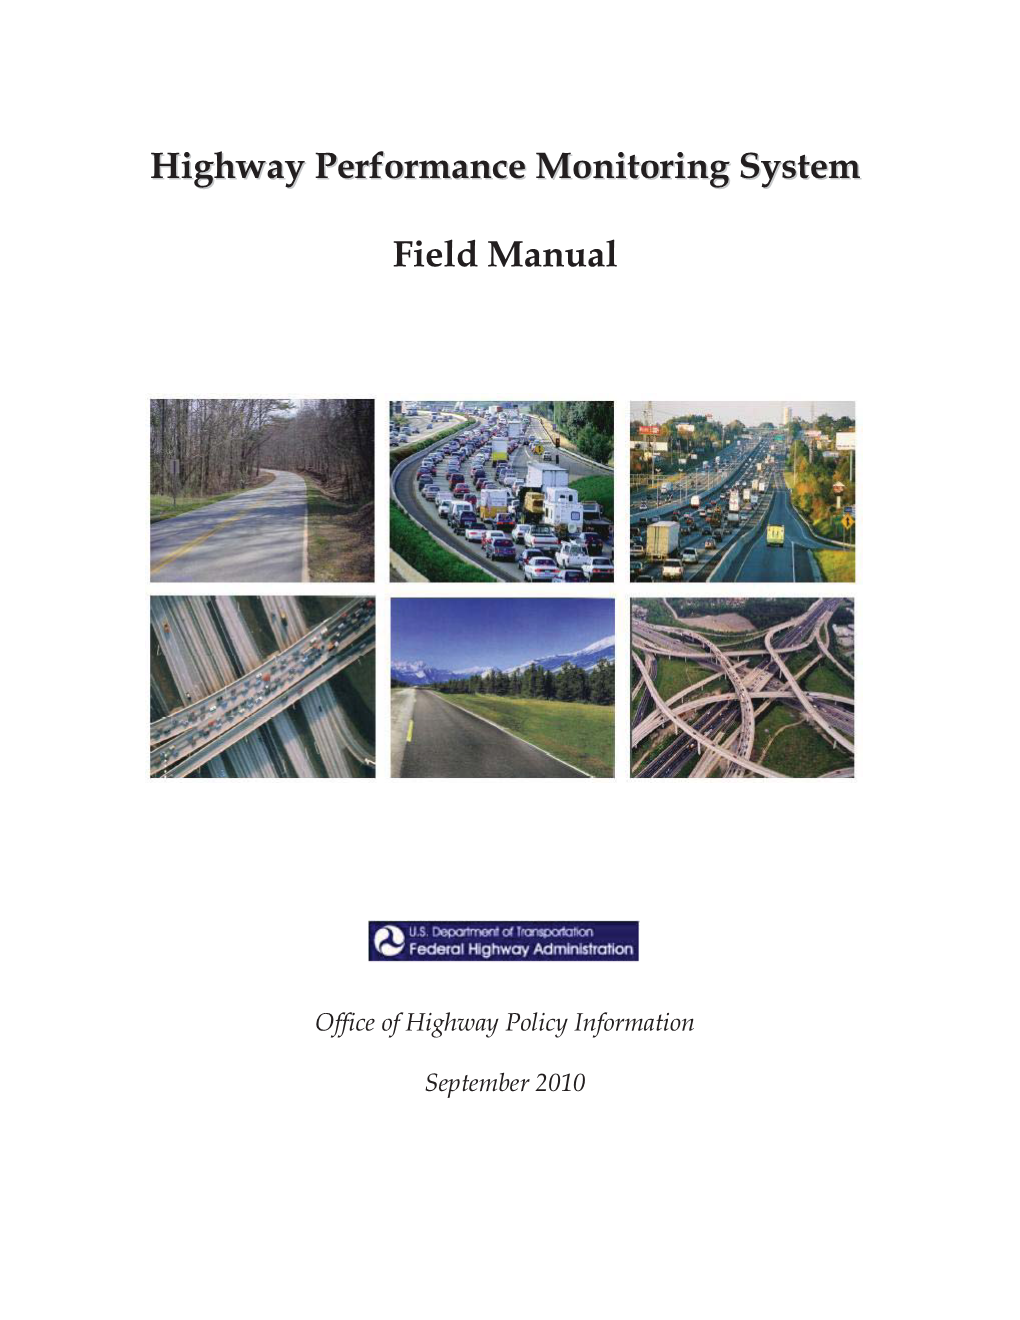 Highway Performance Monitoring System Field Manual 2010